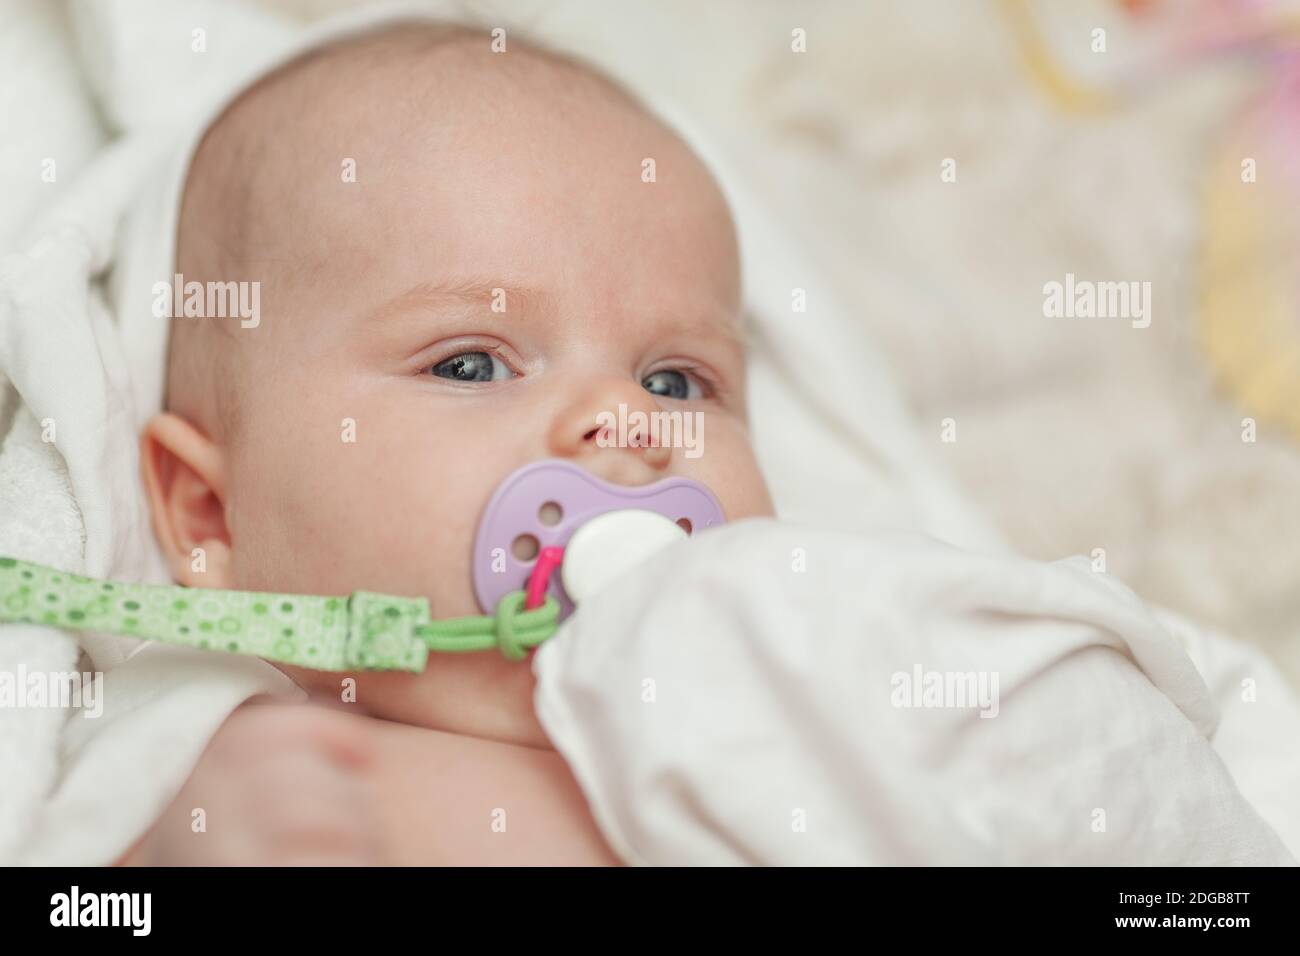 A portrait of a baby boy with a baby dummy Stock Photo